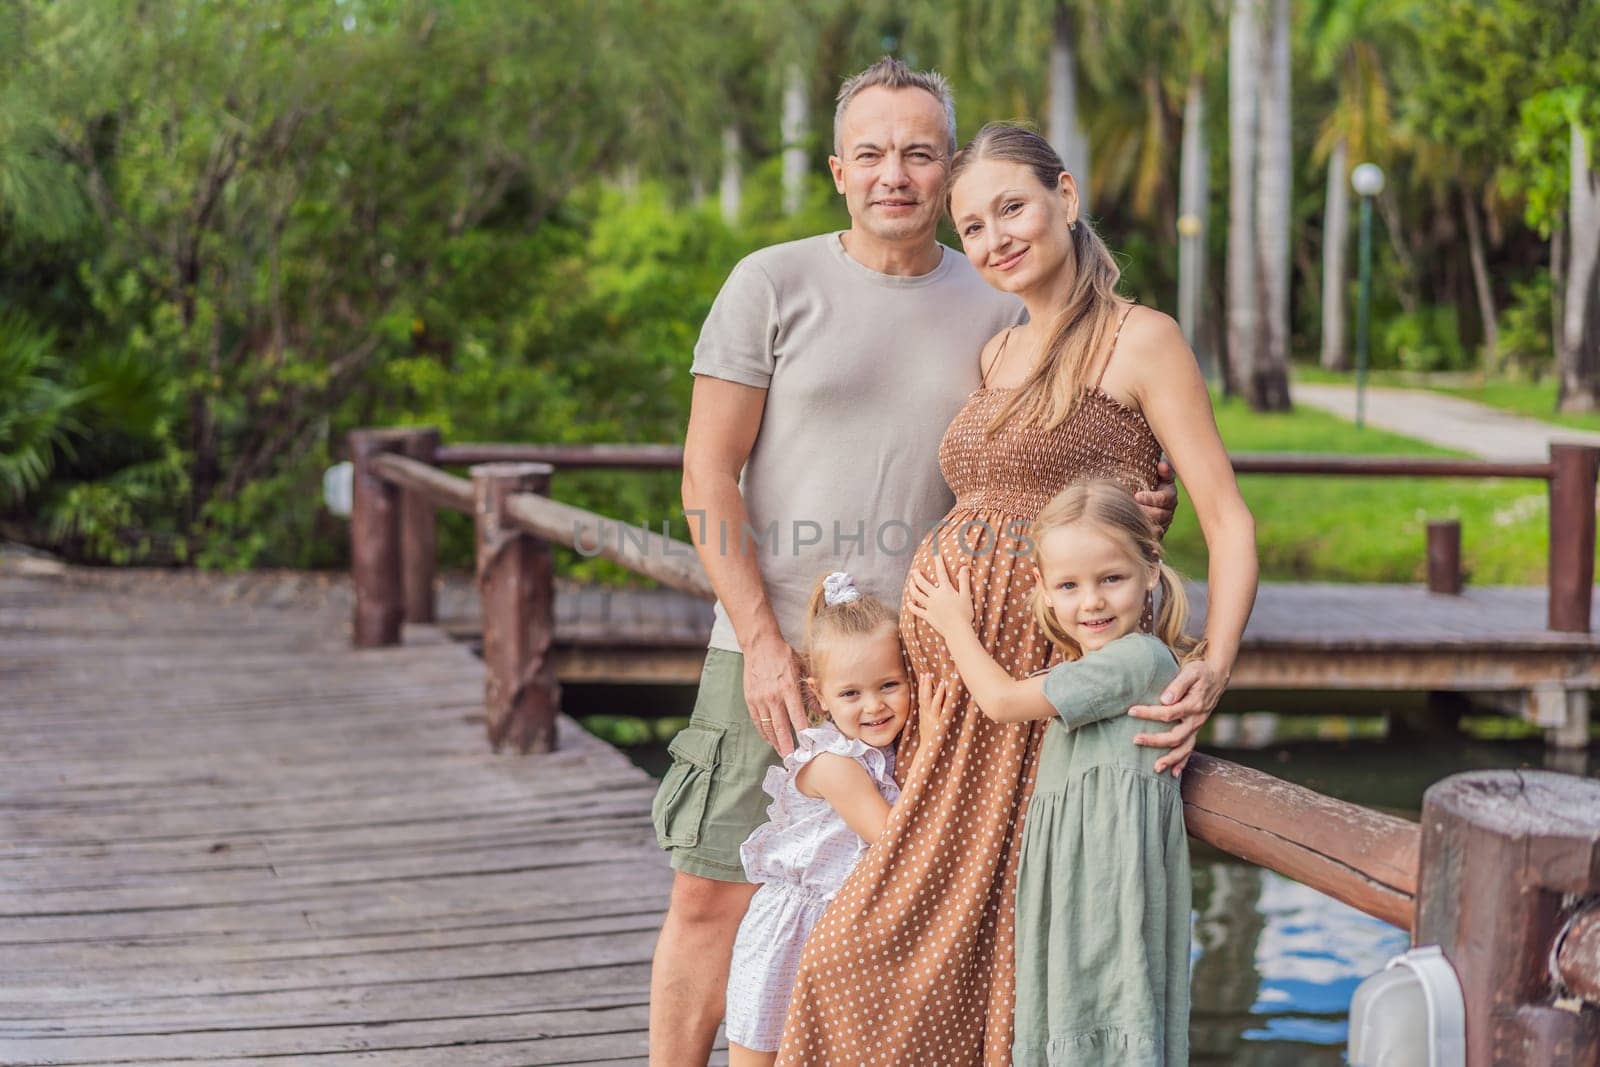 A happy, mature couple over 40 with their two daughters, enjoying a leisurely walk in a park, their joy evident as they embrace the journey of pregnancy later in life.